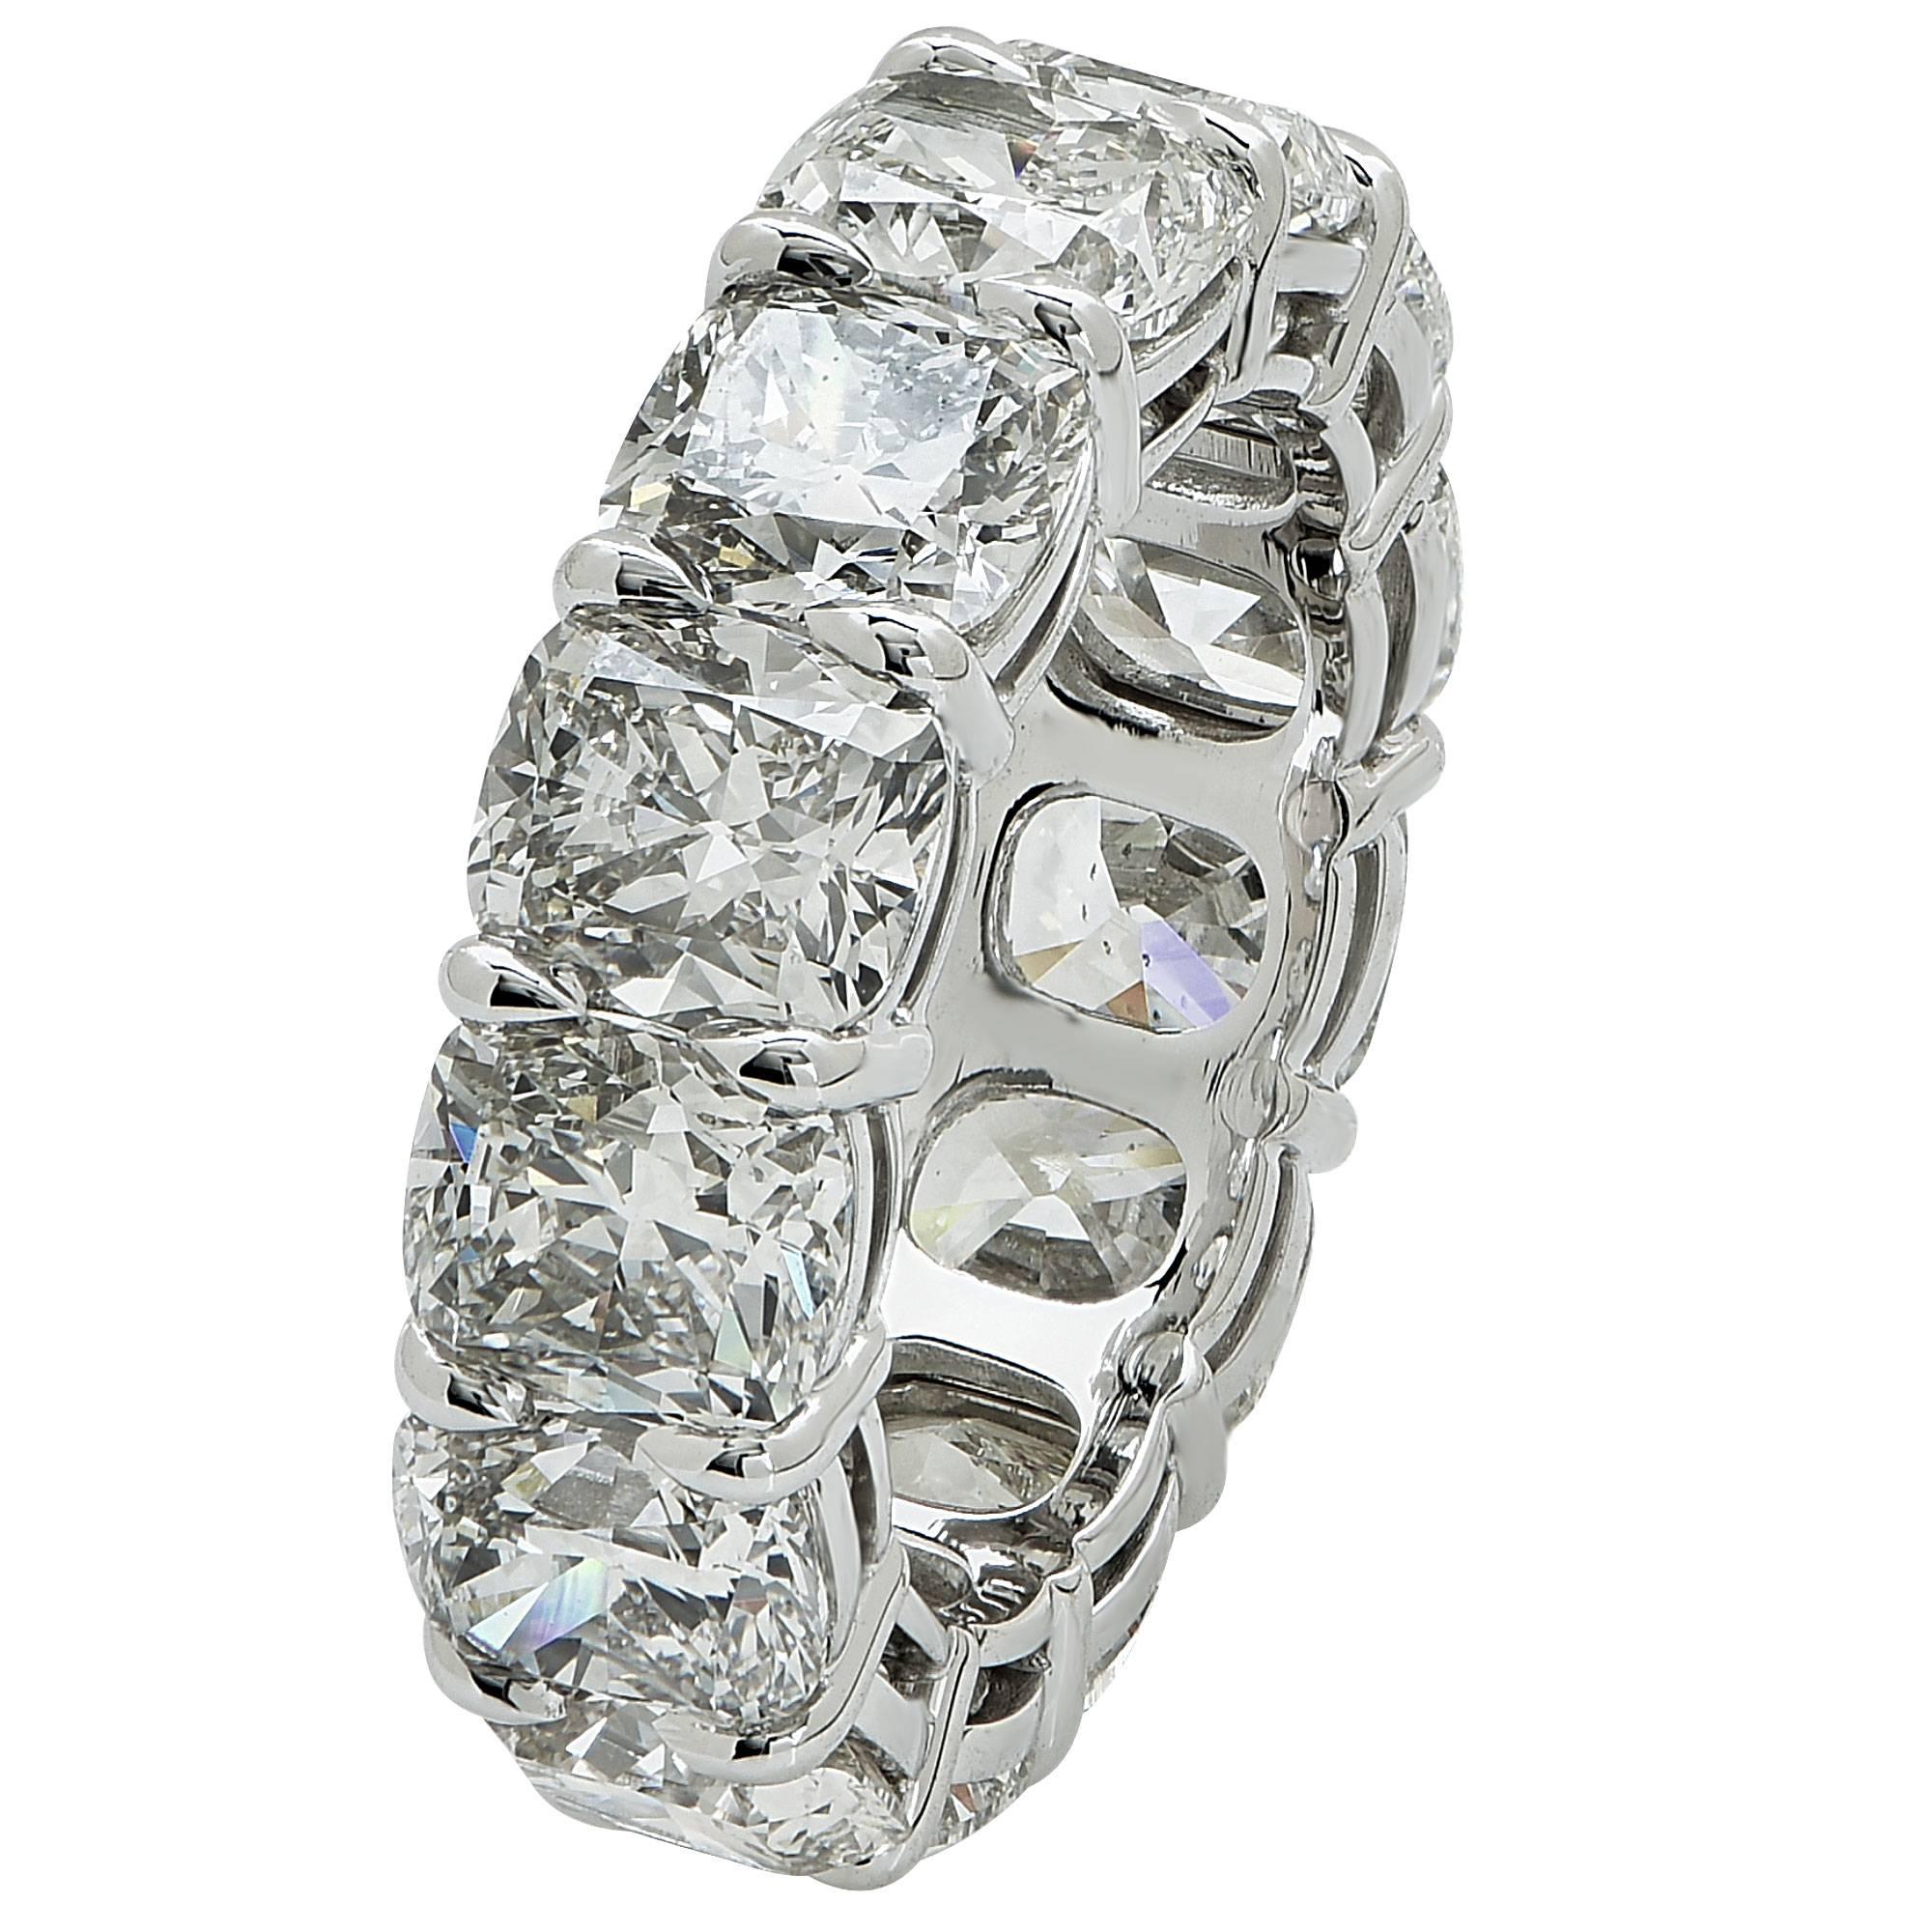 Platinum handmade eternity band containing 13 cushion brilliant cut diamonds weighing 11.03ct G-H color and VS1-SI1. All stones are GIA graded and come with a GIA report.

The ring is a size 6 and CANNOT be sized up or down.
It is stamped and